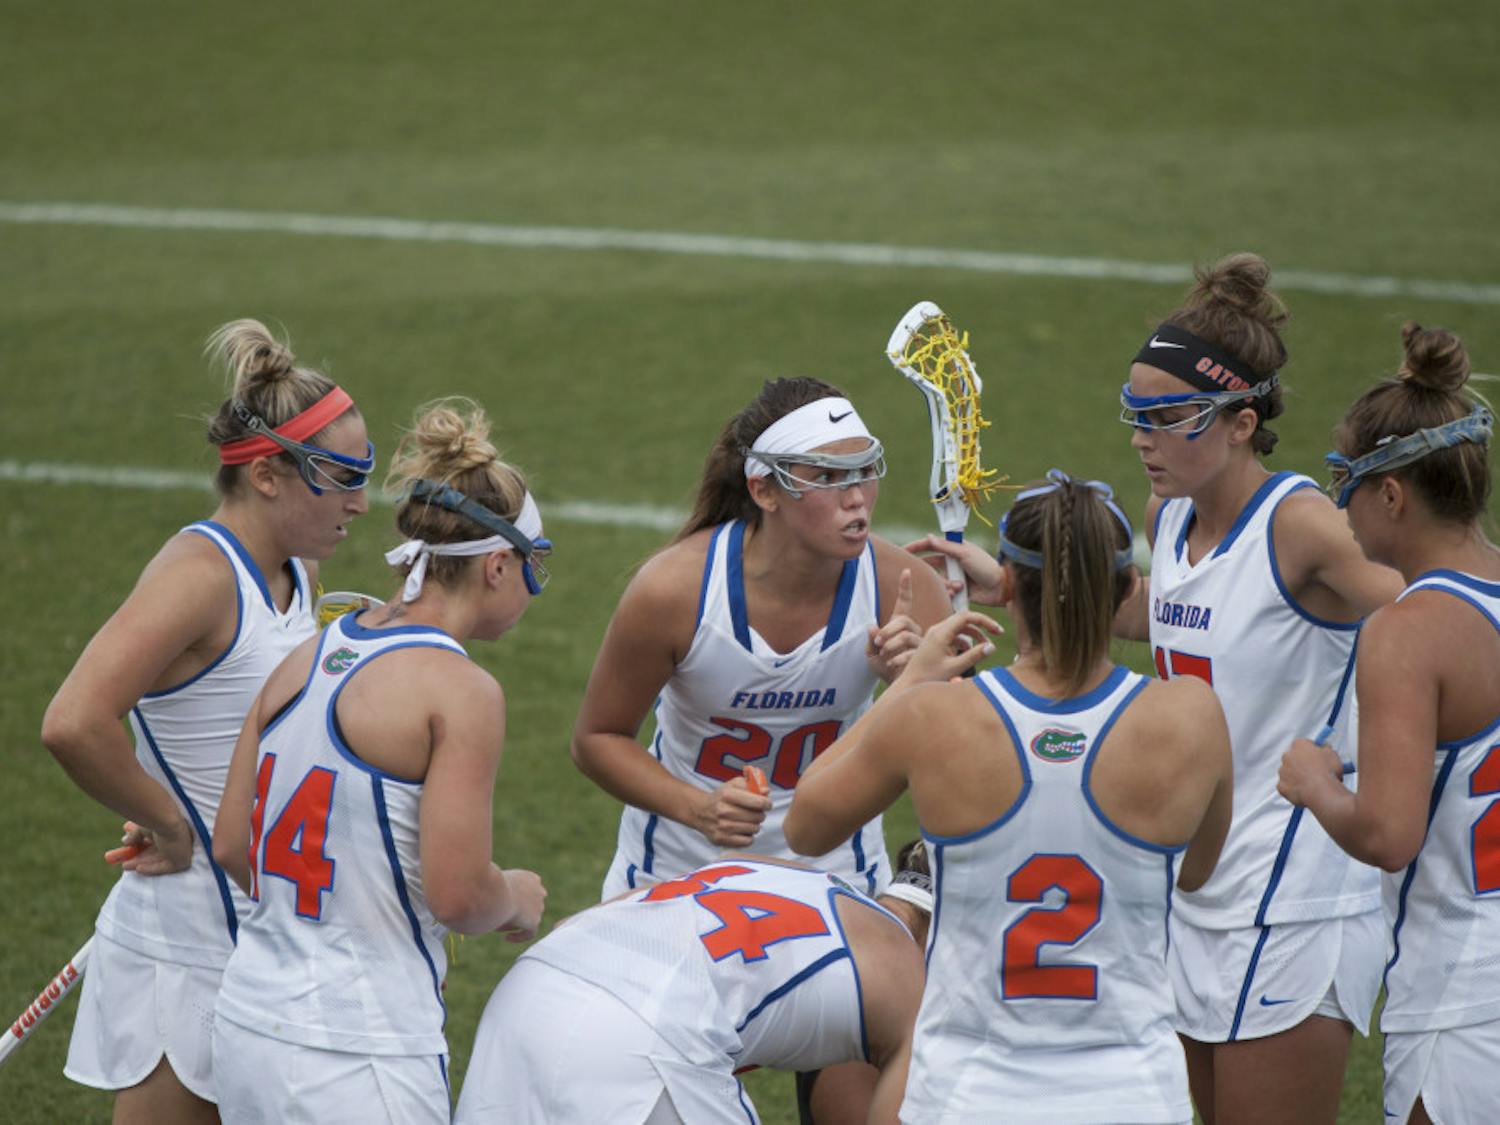 Sophomore midfielder Brianna Harris (20) has a twin sister who plays for the Gators' next opponent, Navy. Harris will not play in the game due to a season-ending ACL injury suffered earlier in the year. 